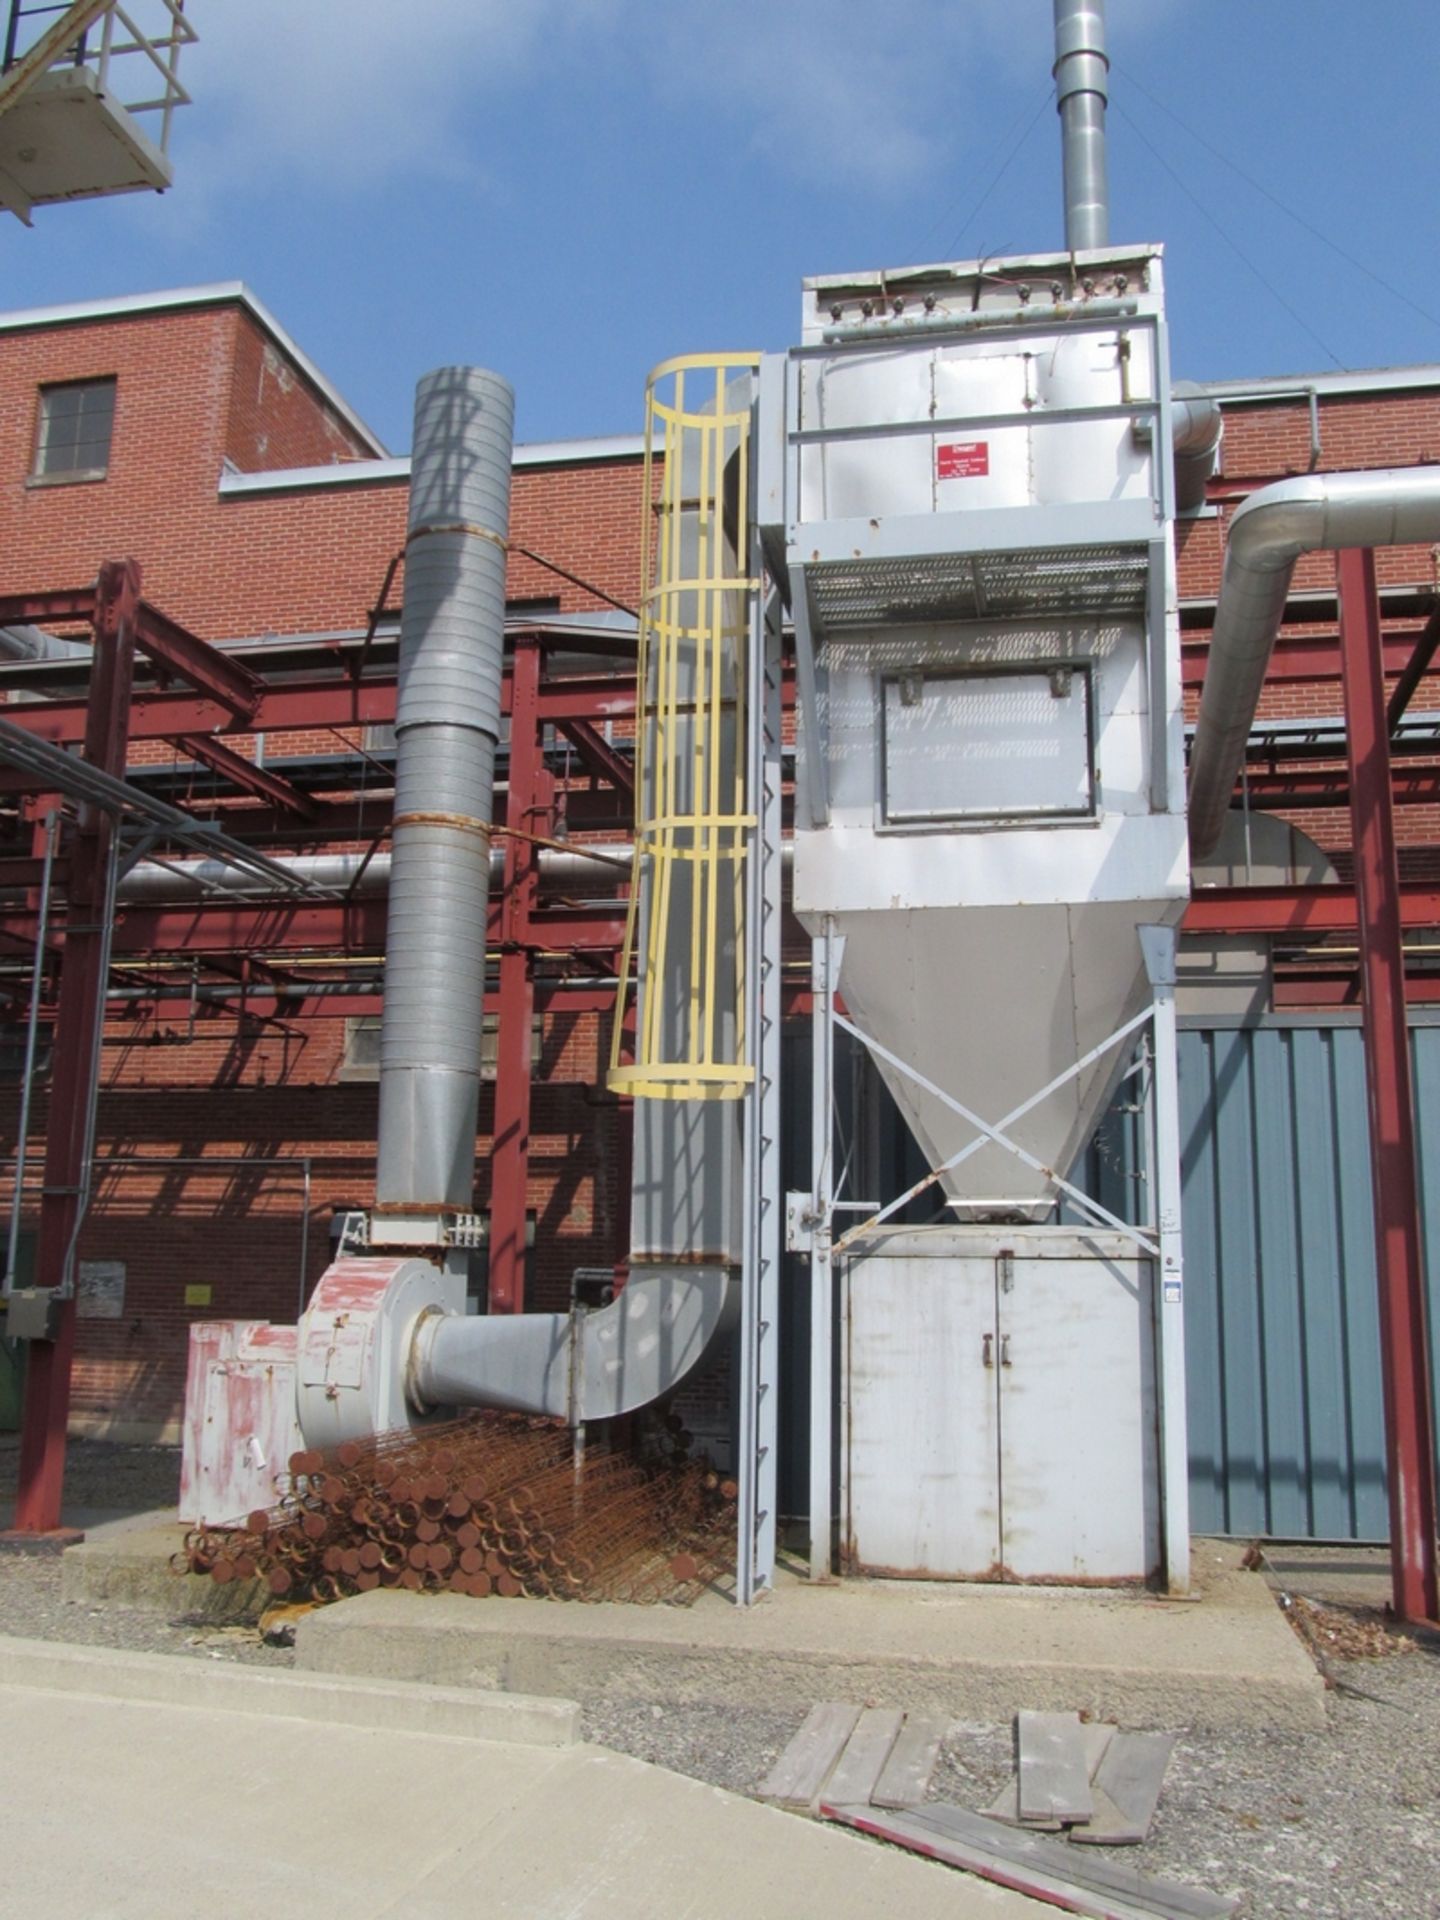 Farr Ramtube Jet Pulse Dust Collector; Carbon Steel. Approximately 900 square feet filter area.